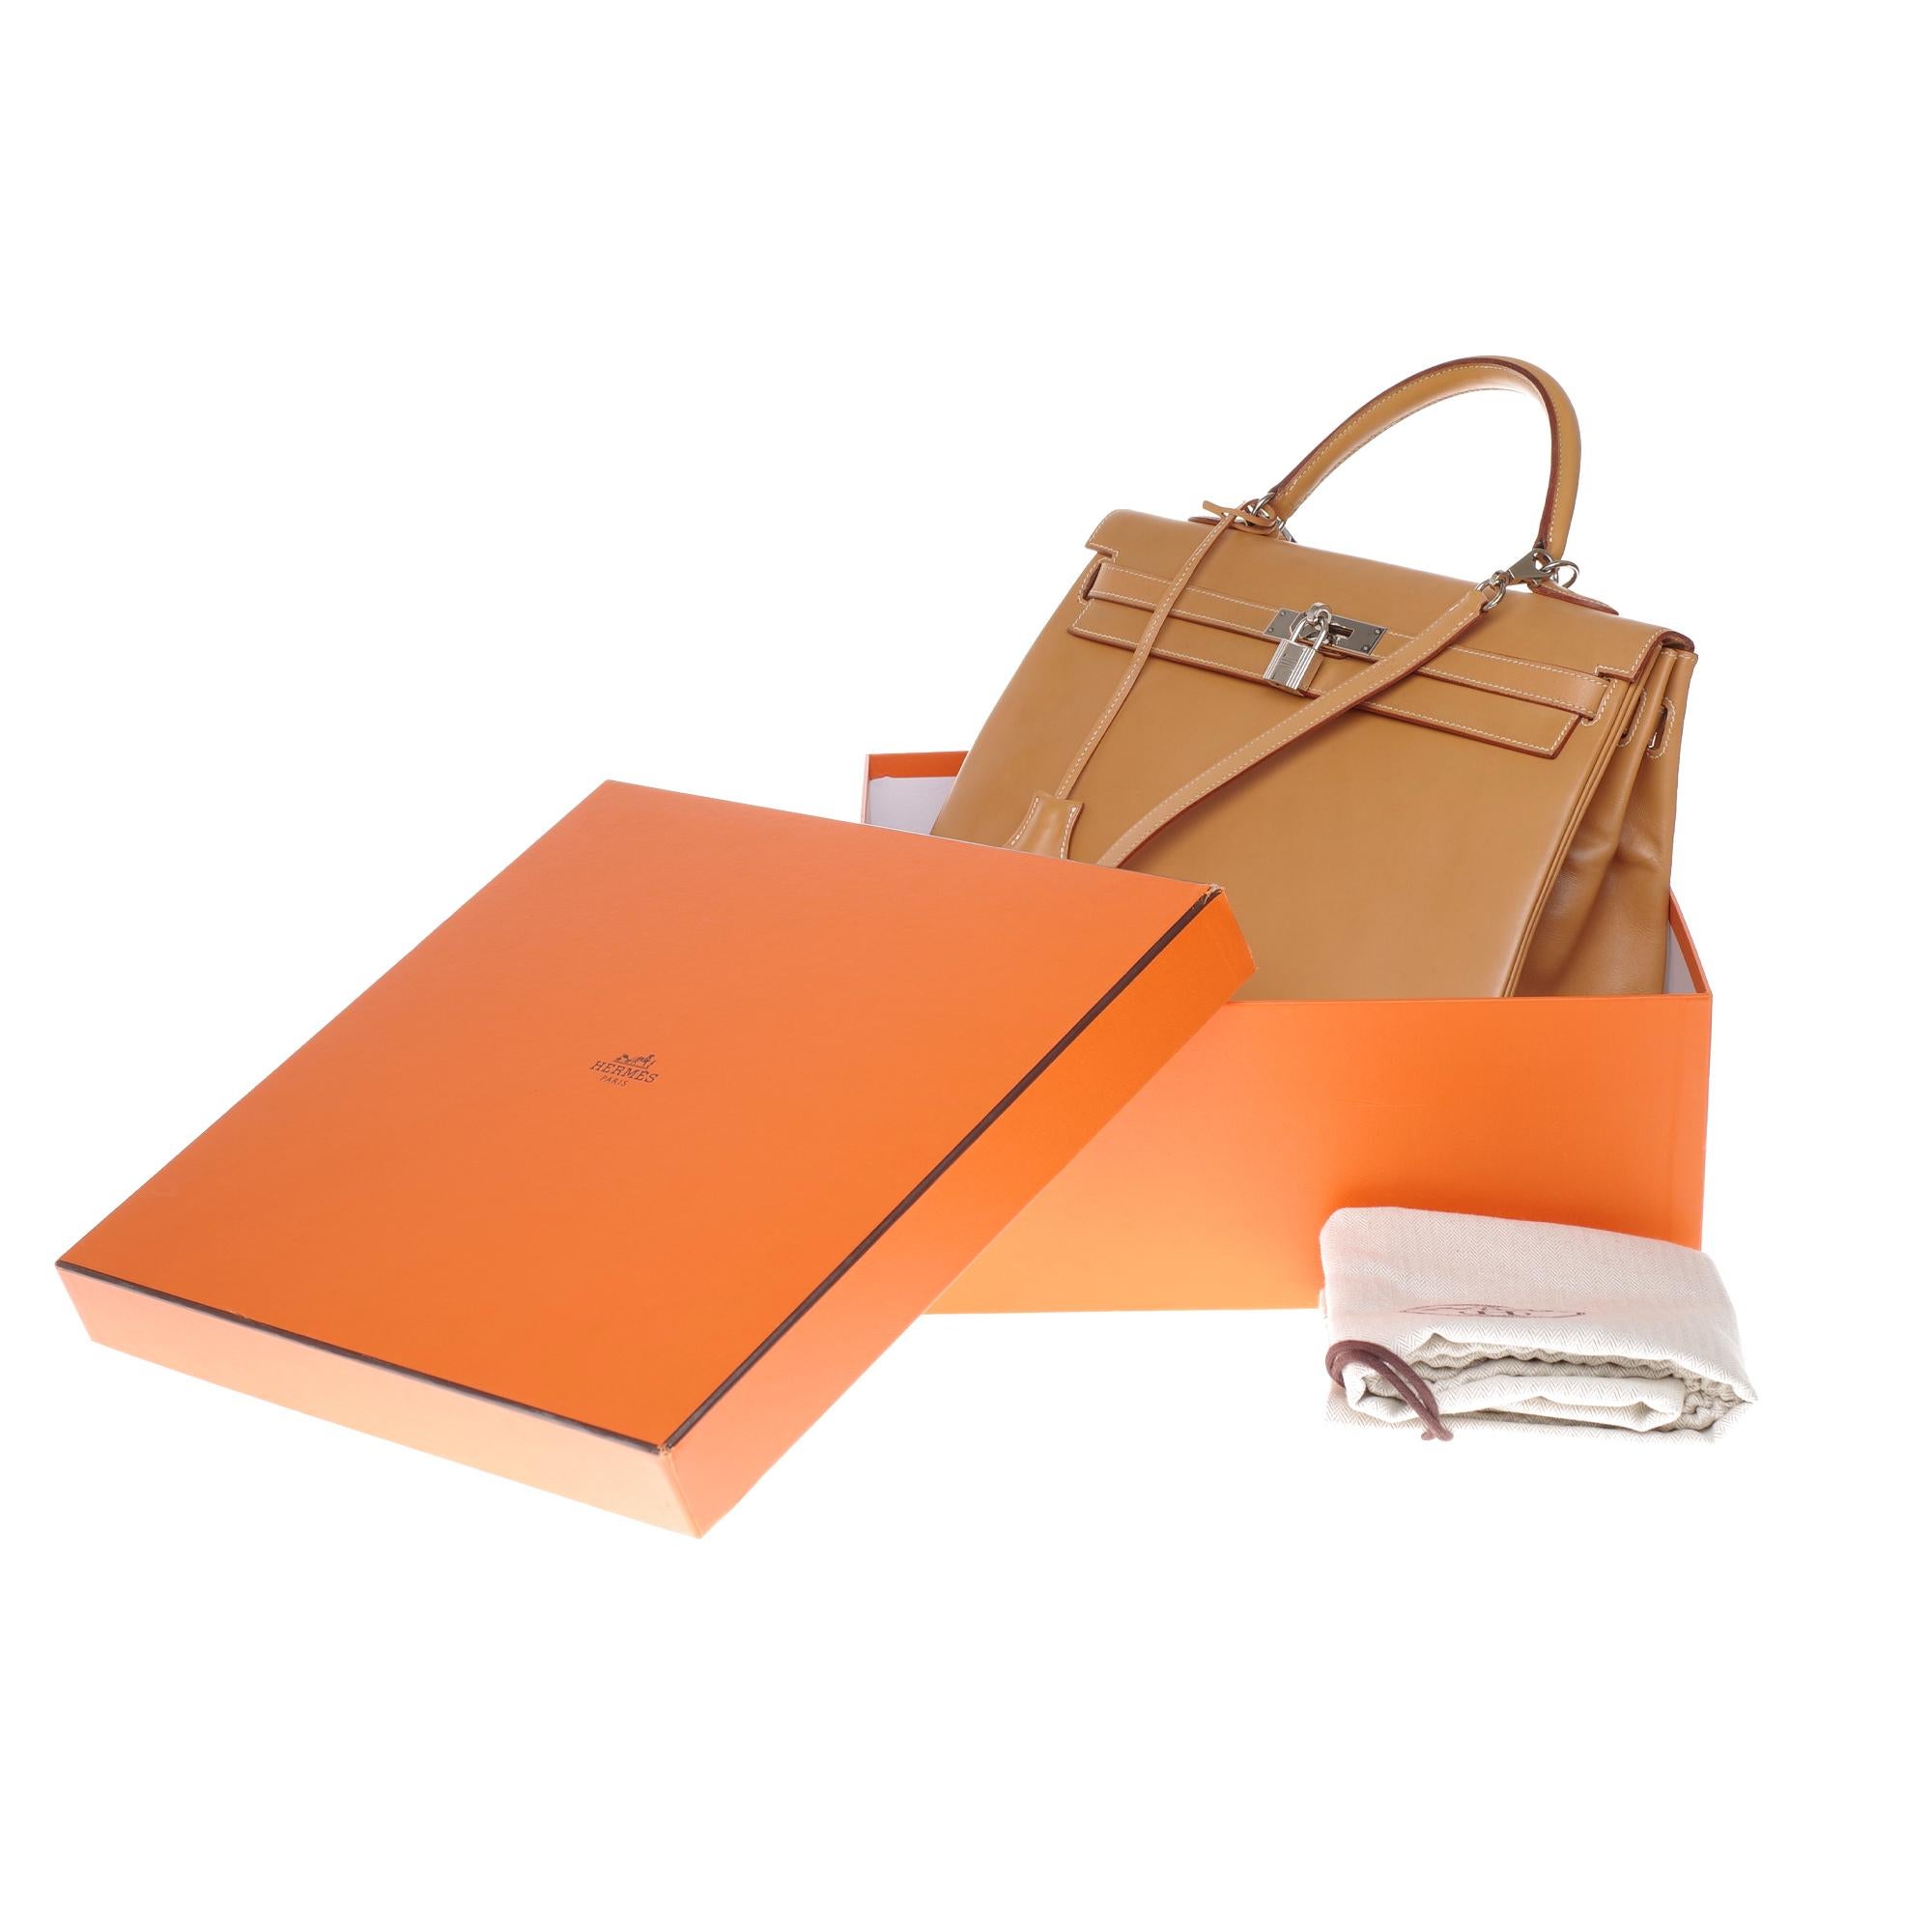 Hermès Kelly 35 handbag in natural calf leather with strap and silver hardware 6